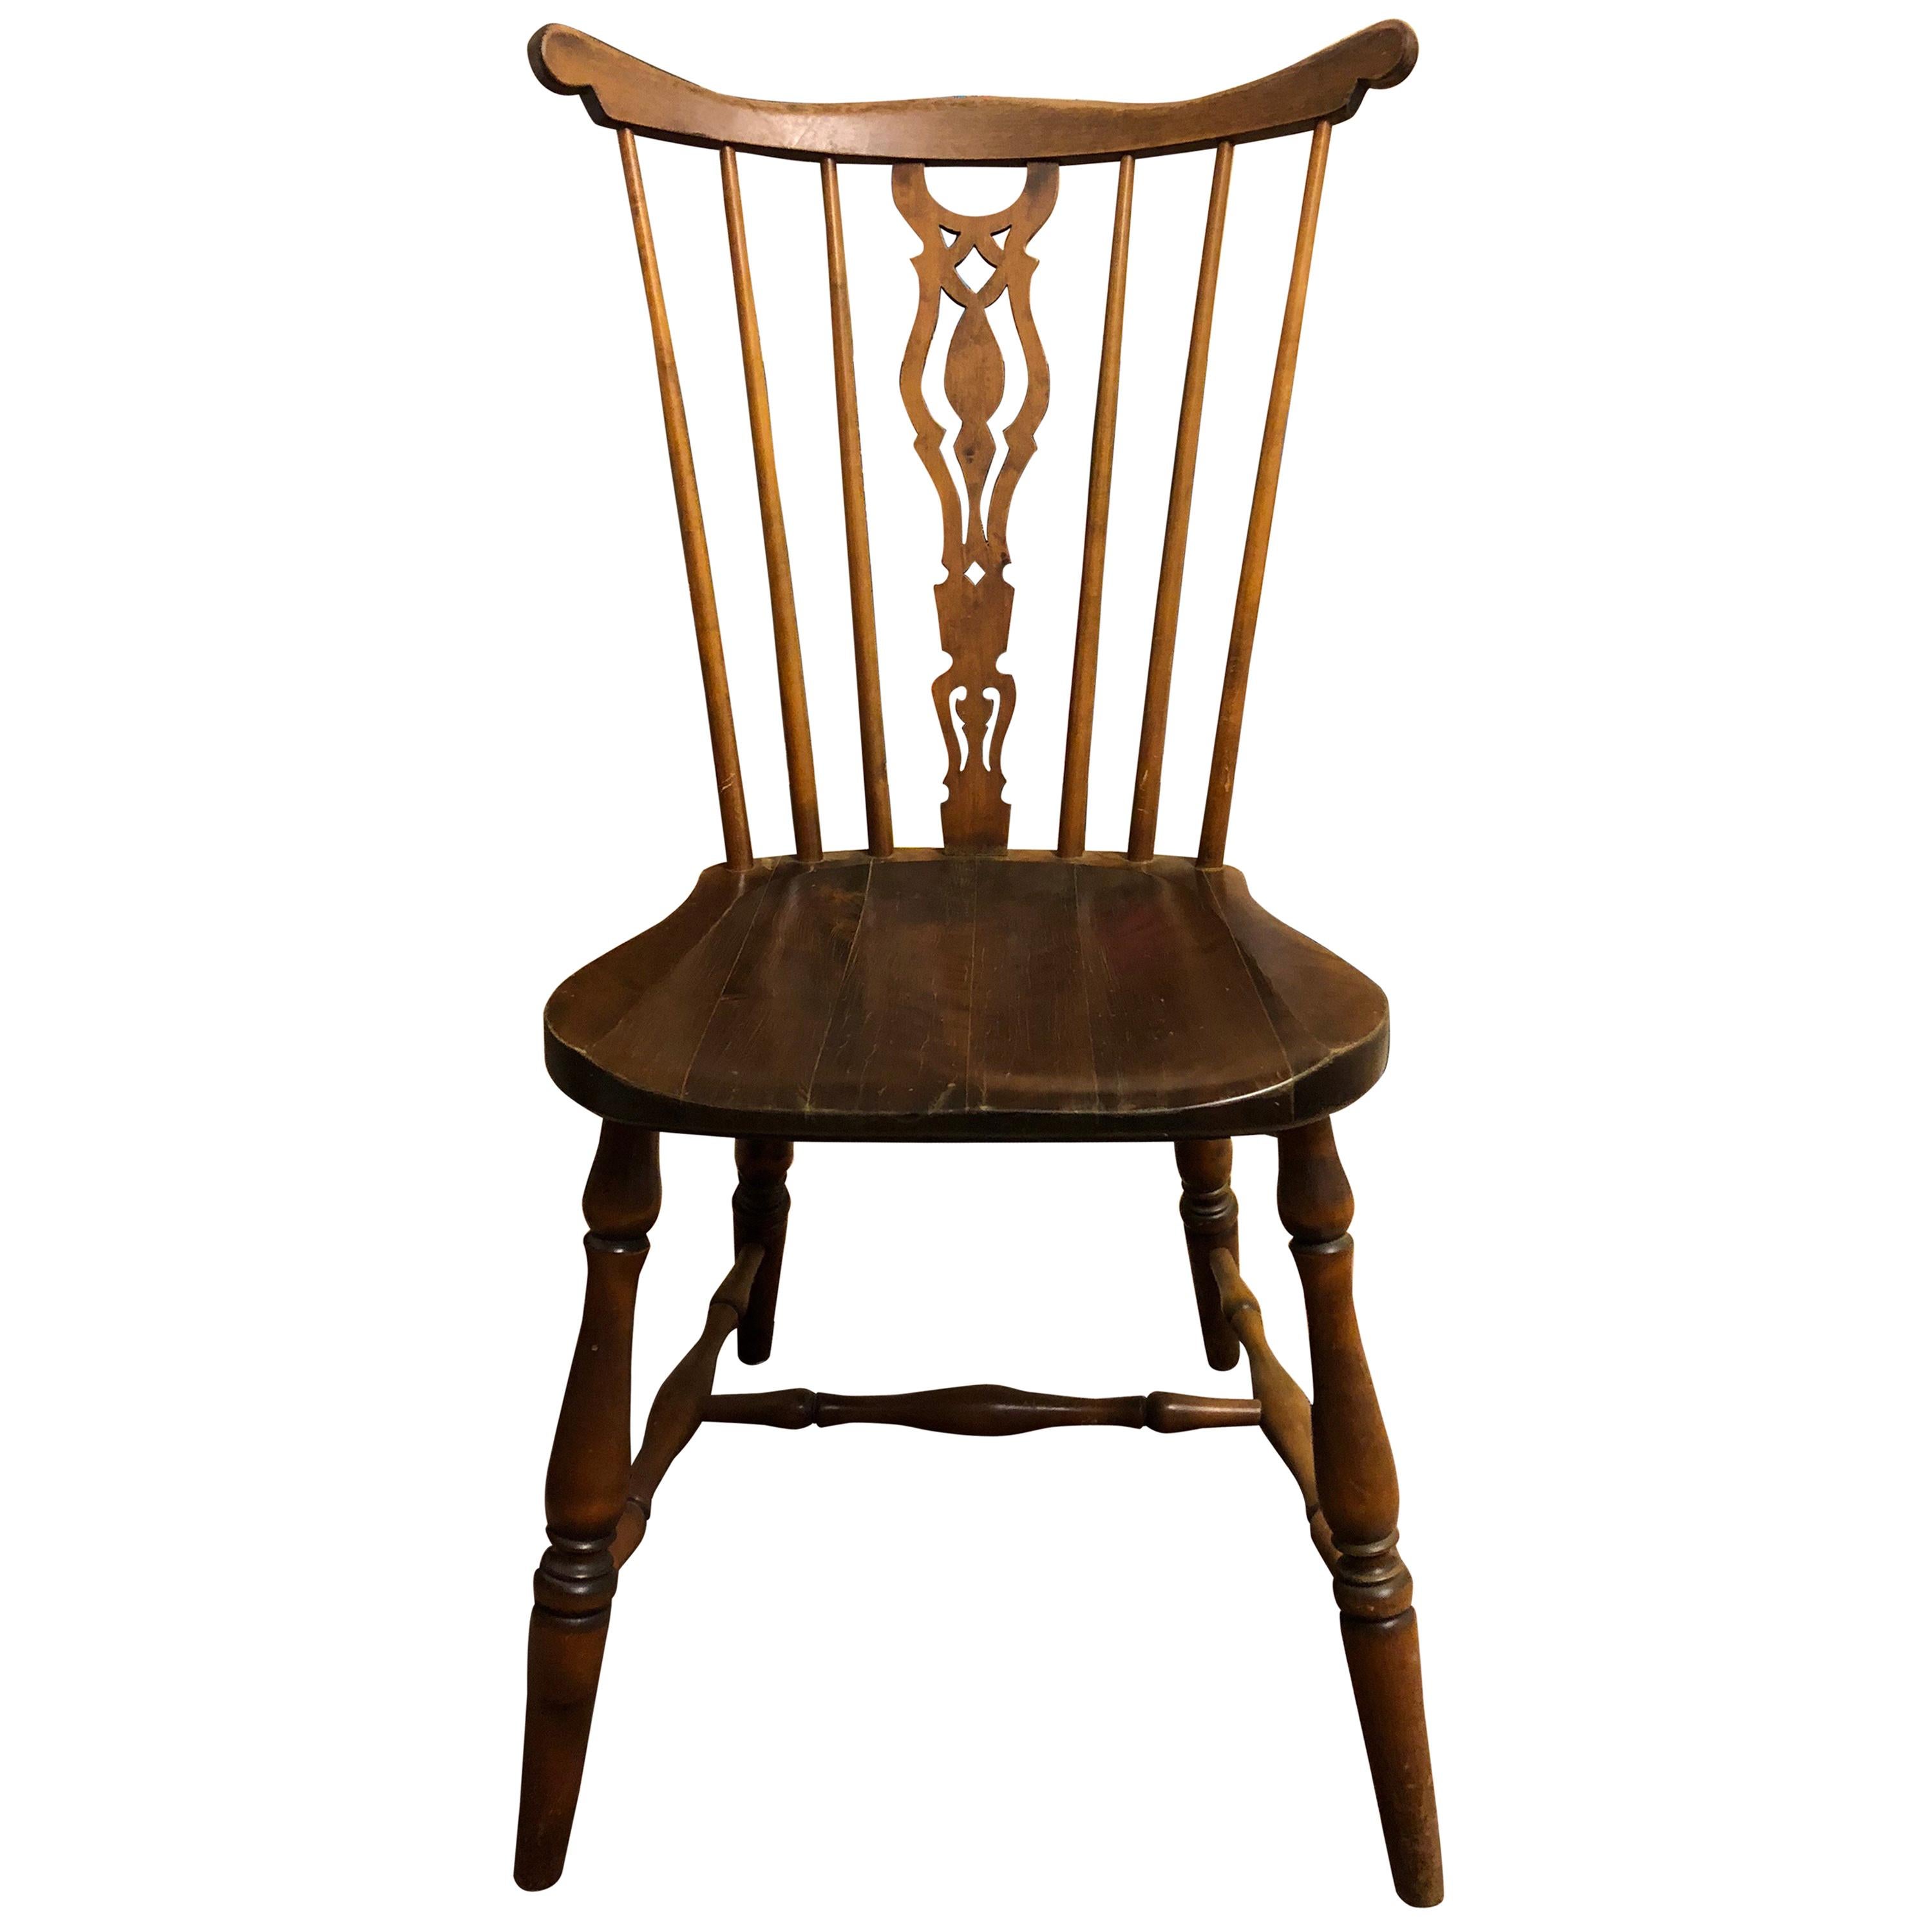 One Antique Rustic Comb Yew Windsor Wood English Bow-Back Chair